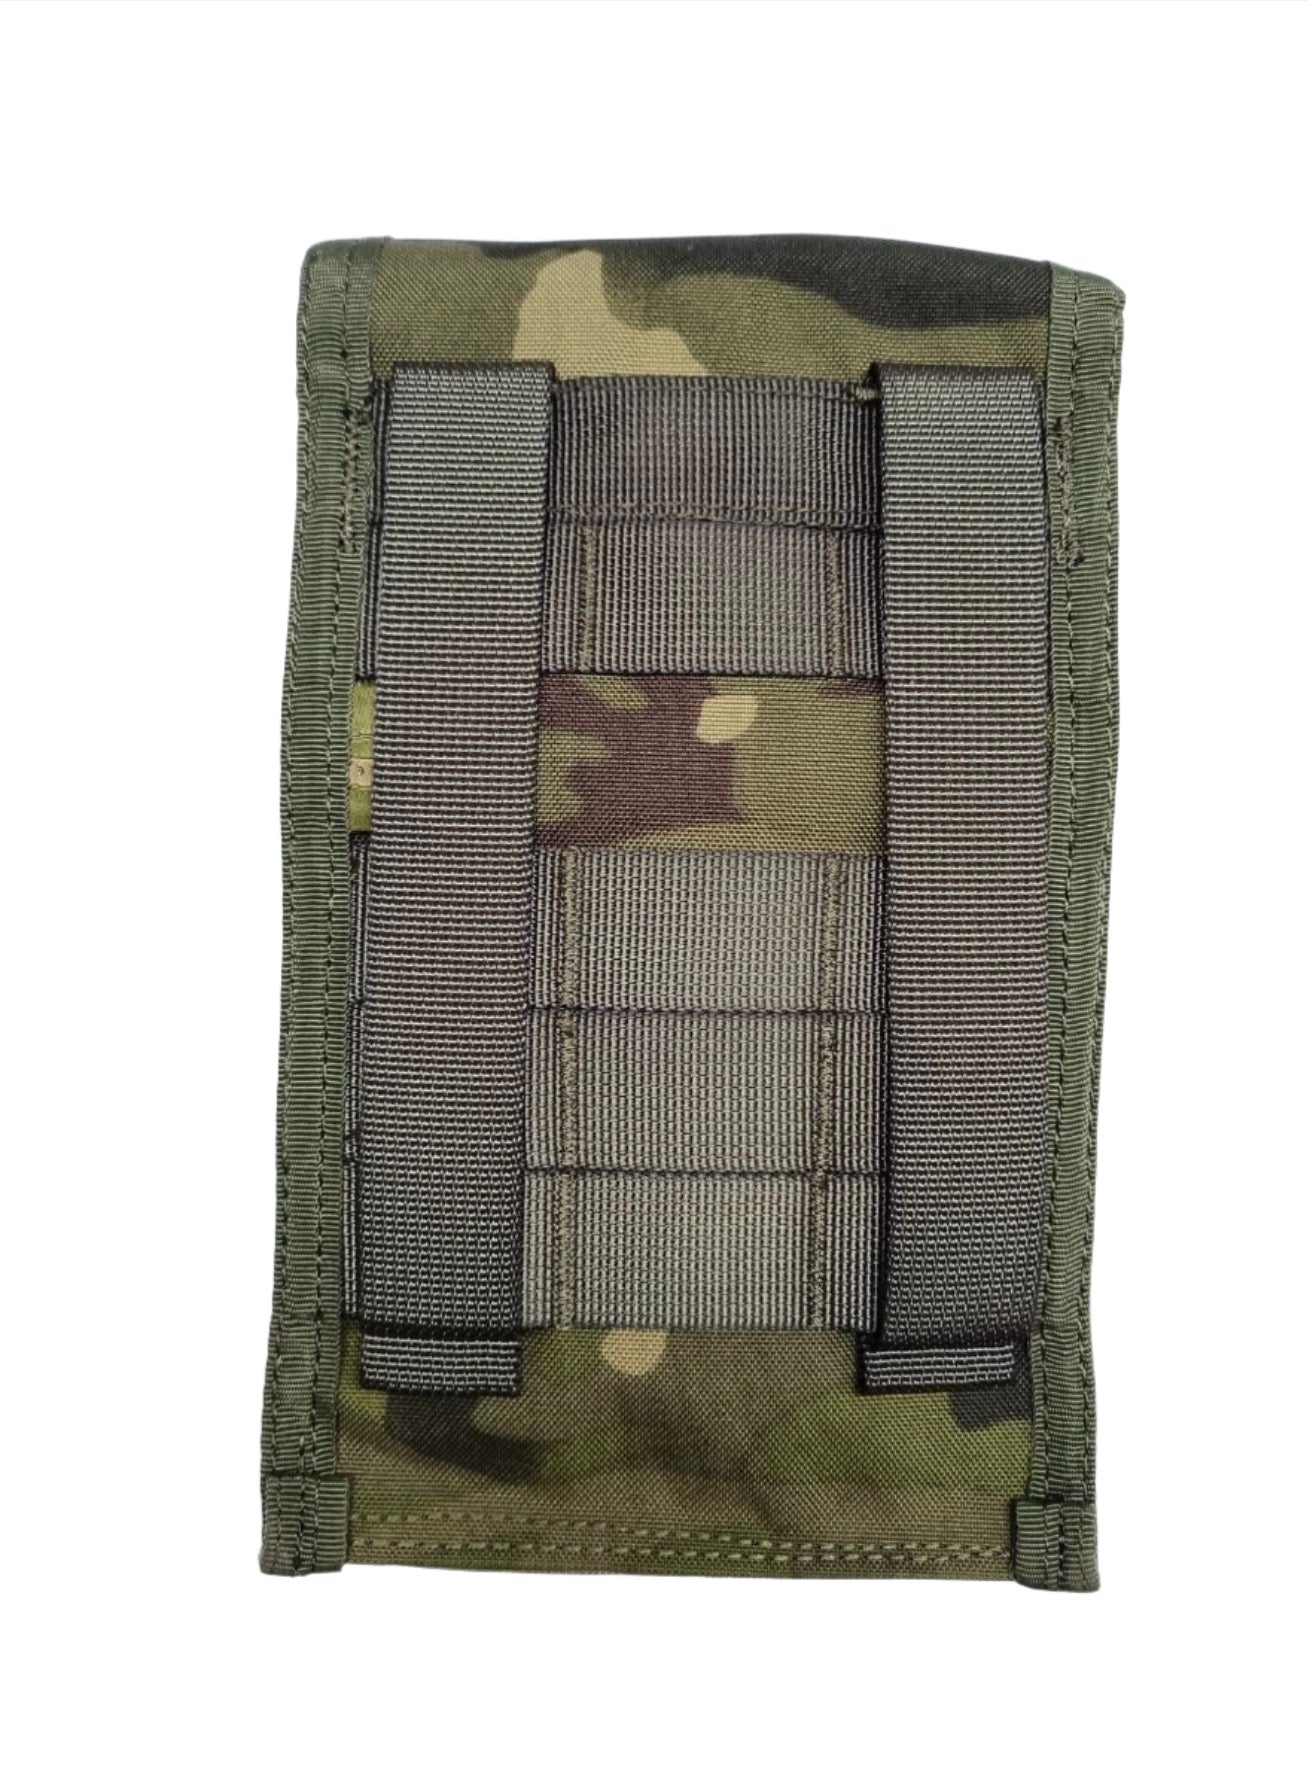 SHE-945 Medium Utility Pouch Colour UTP Temperate Backside view.